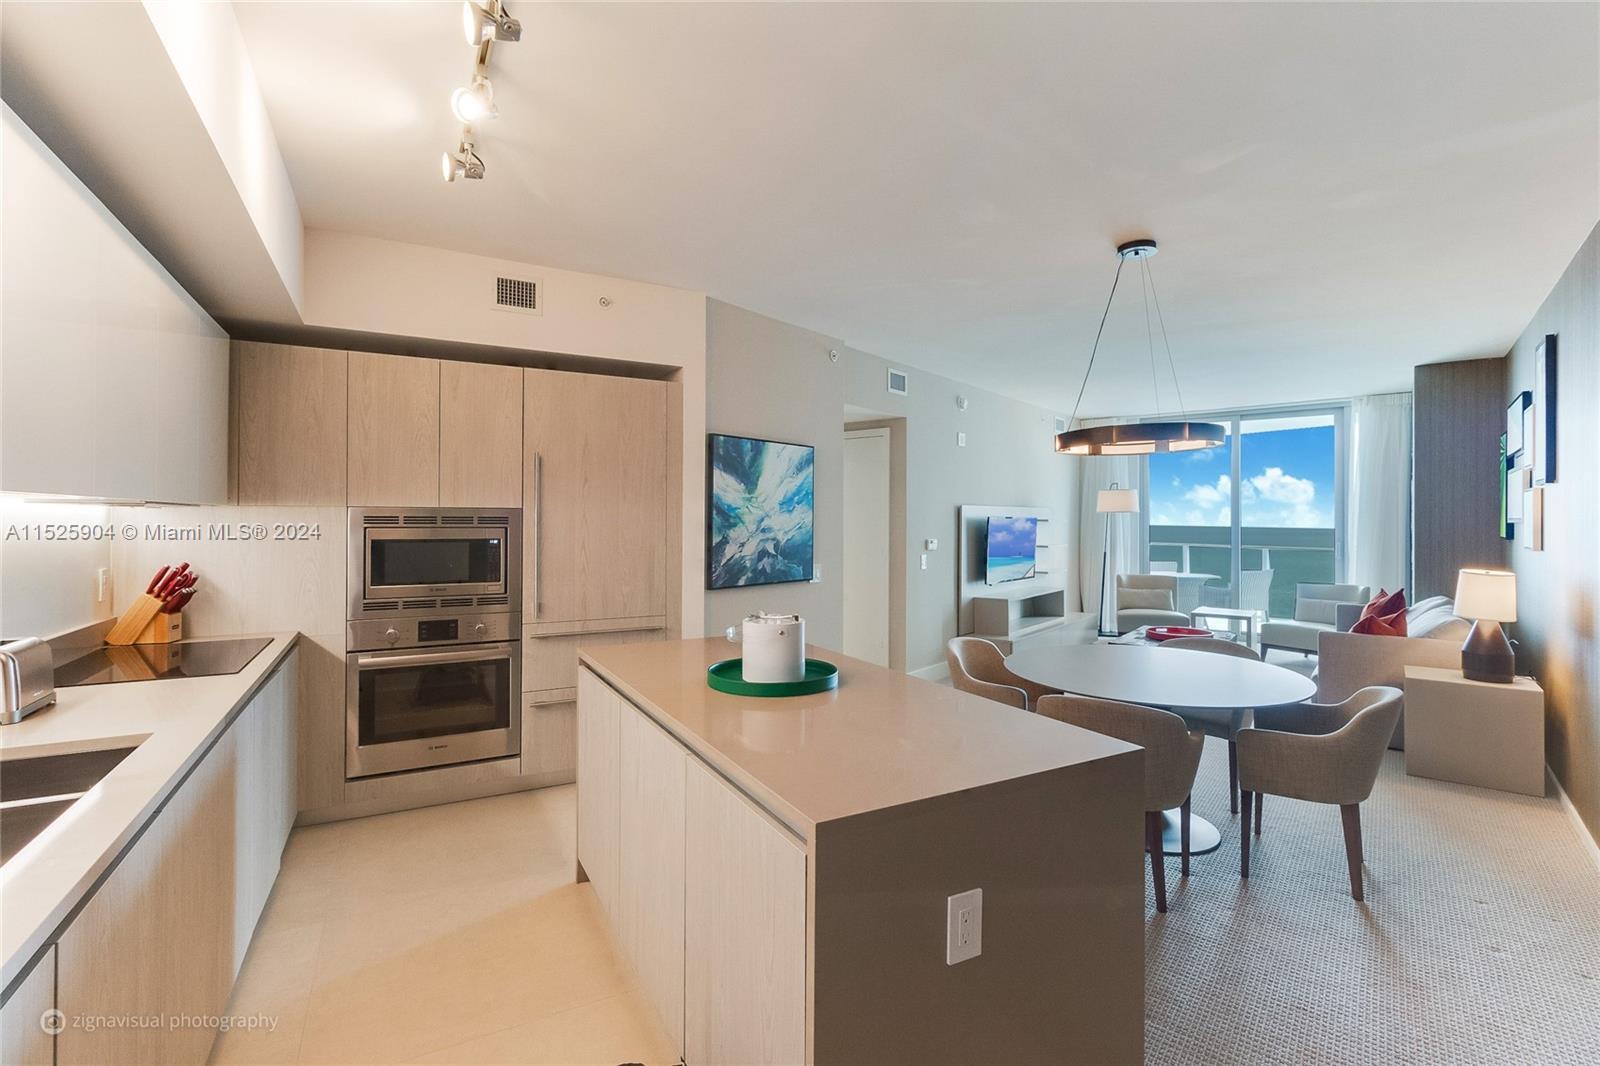 Photo of 4111 S Ocean Dr #1807 in Hollywood, FL